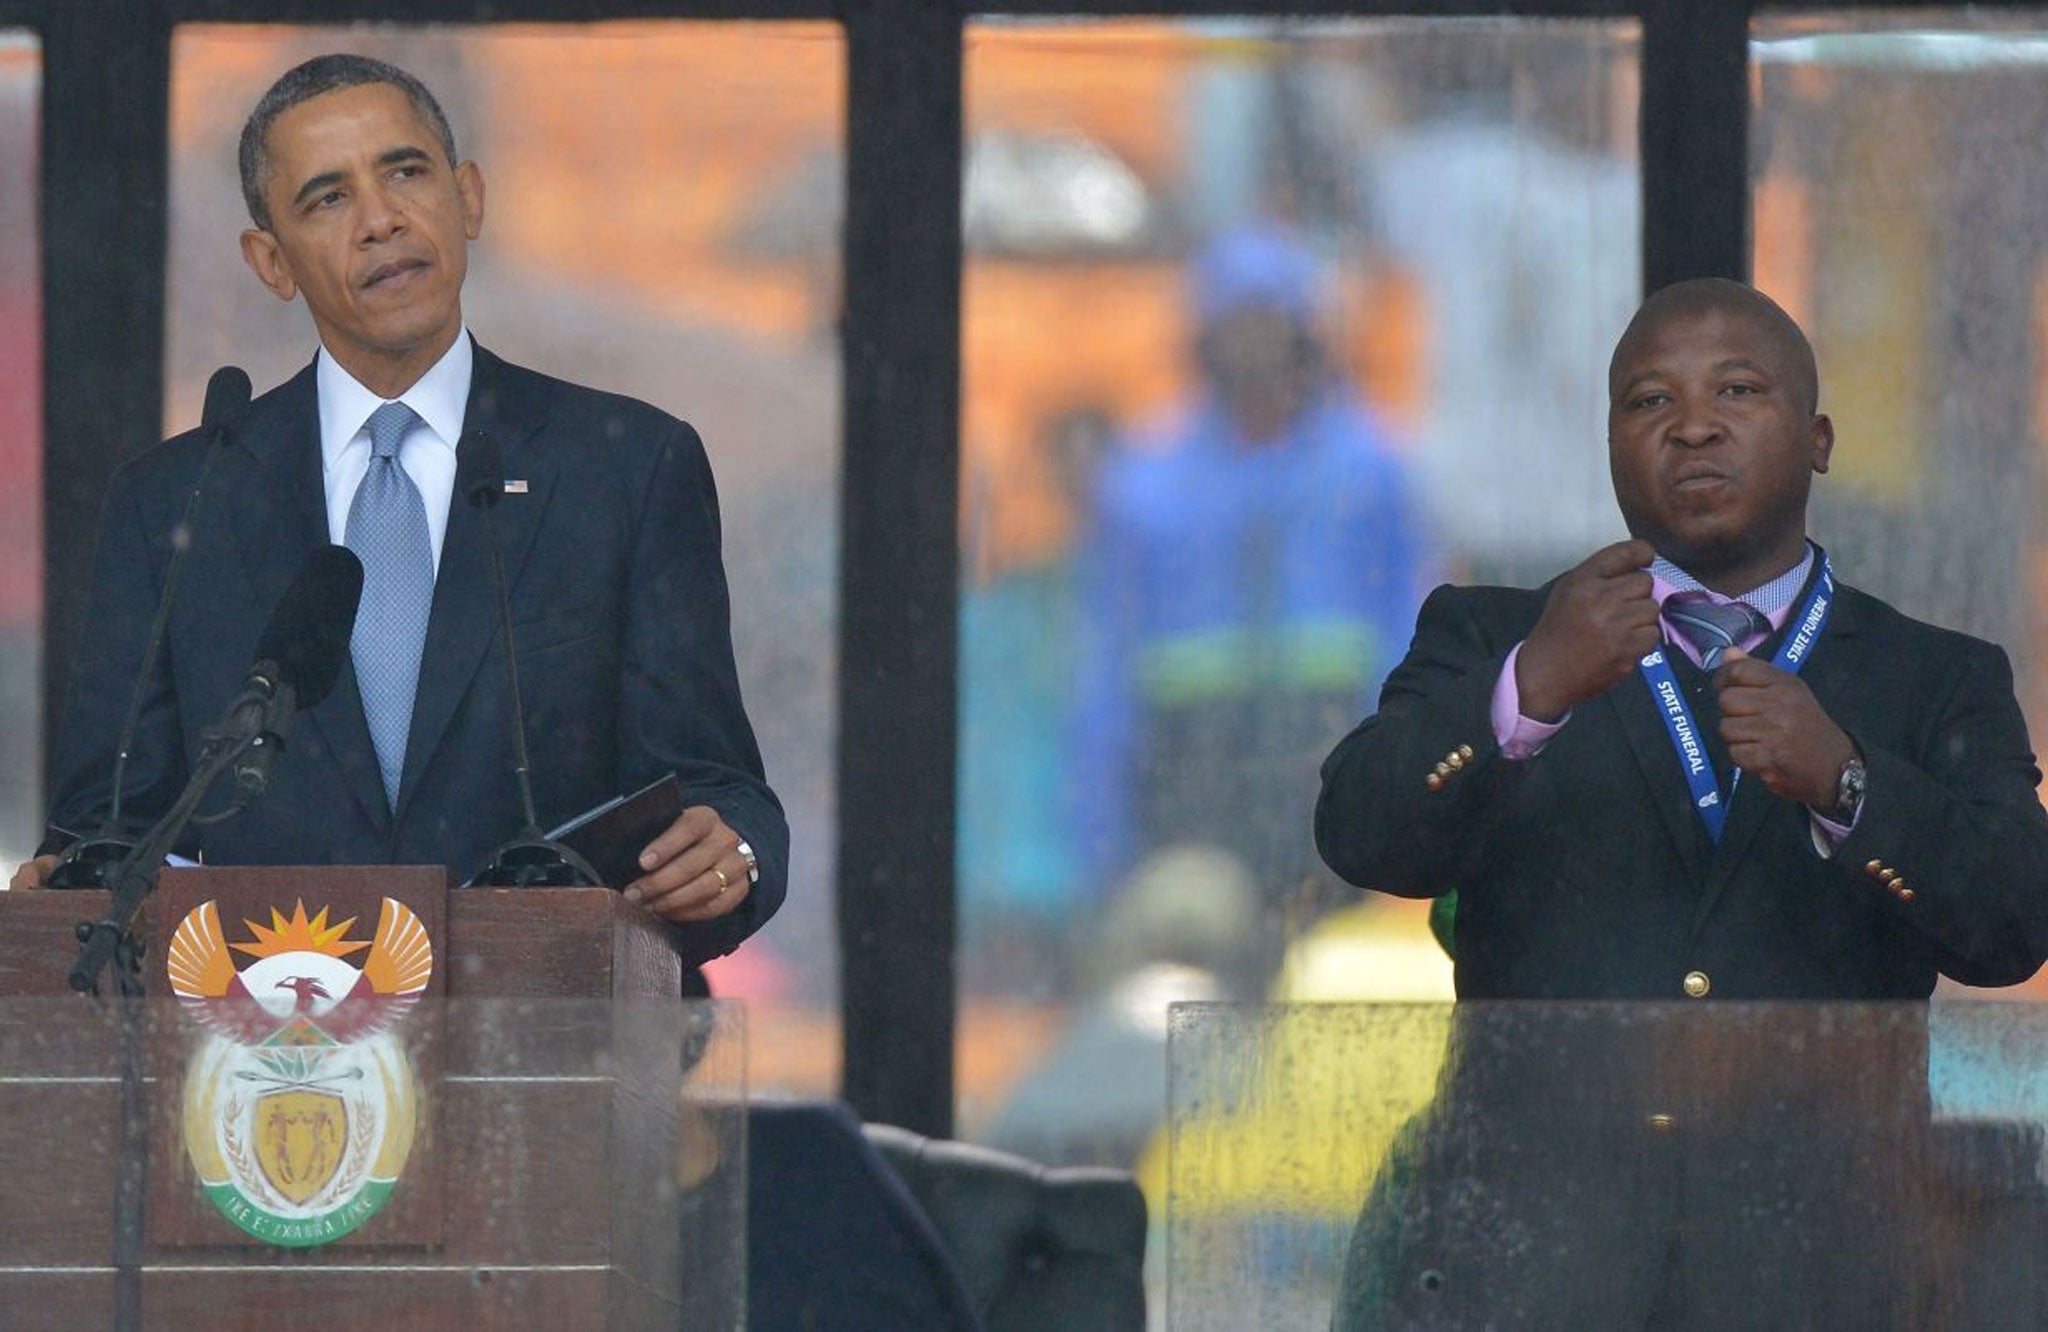 South Africa's deaf community has accused the sign language interpreter at Nelson Mandela's memorial of being 'fake'